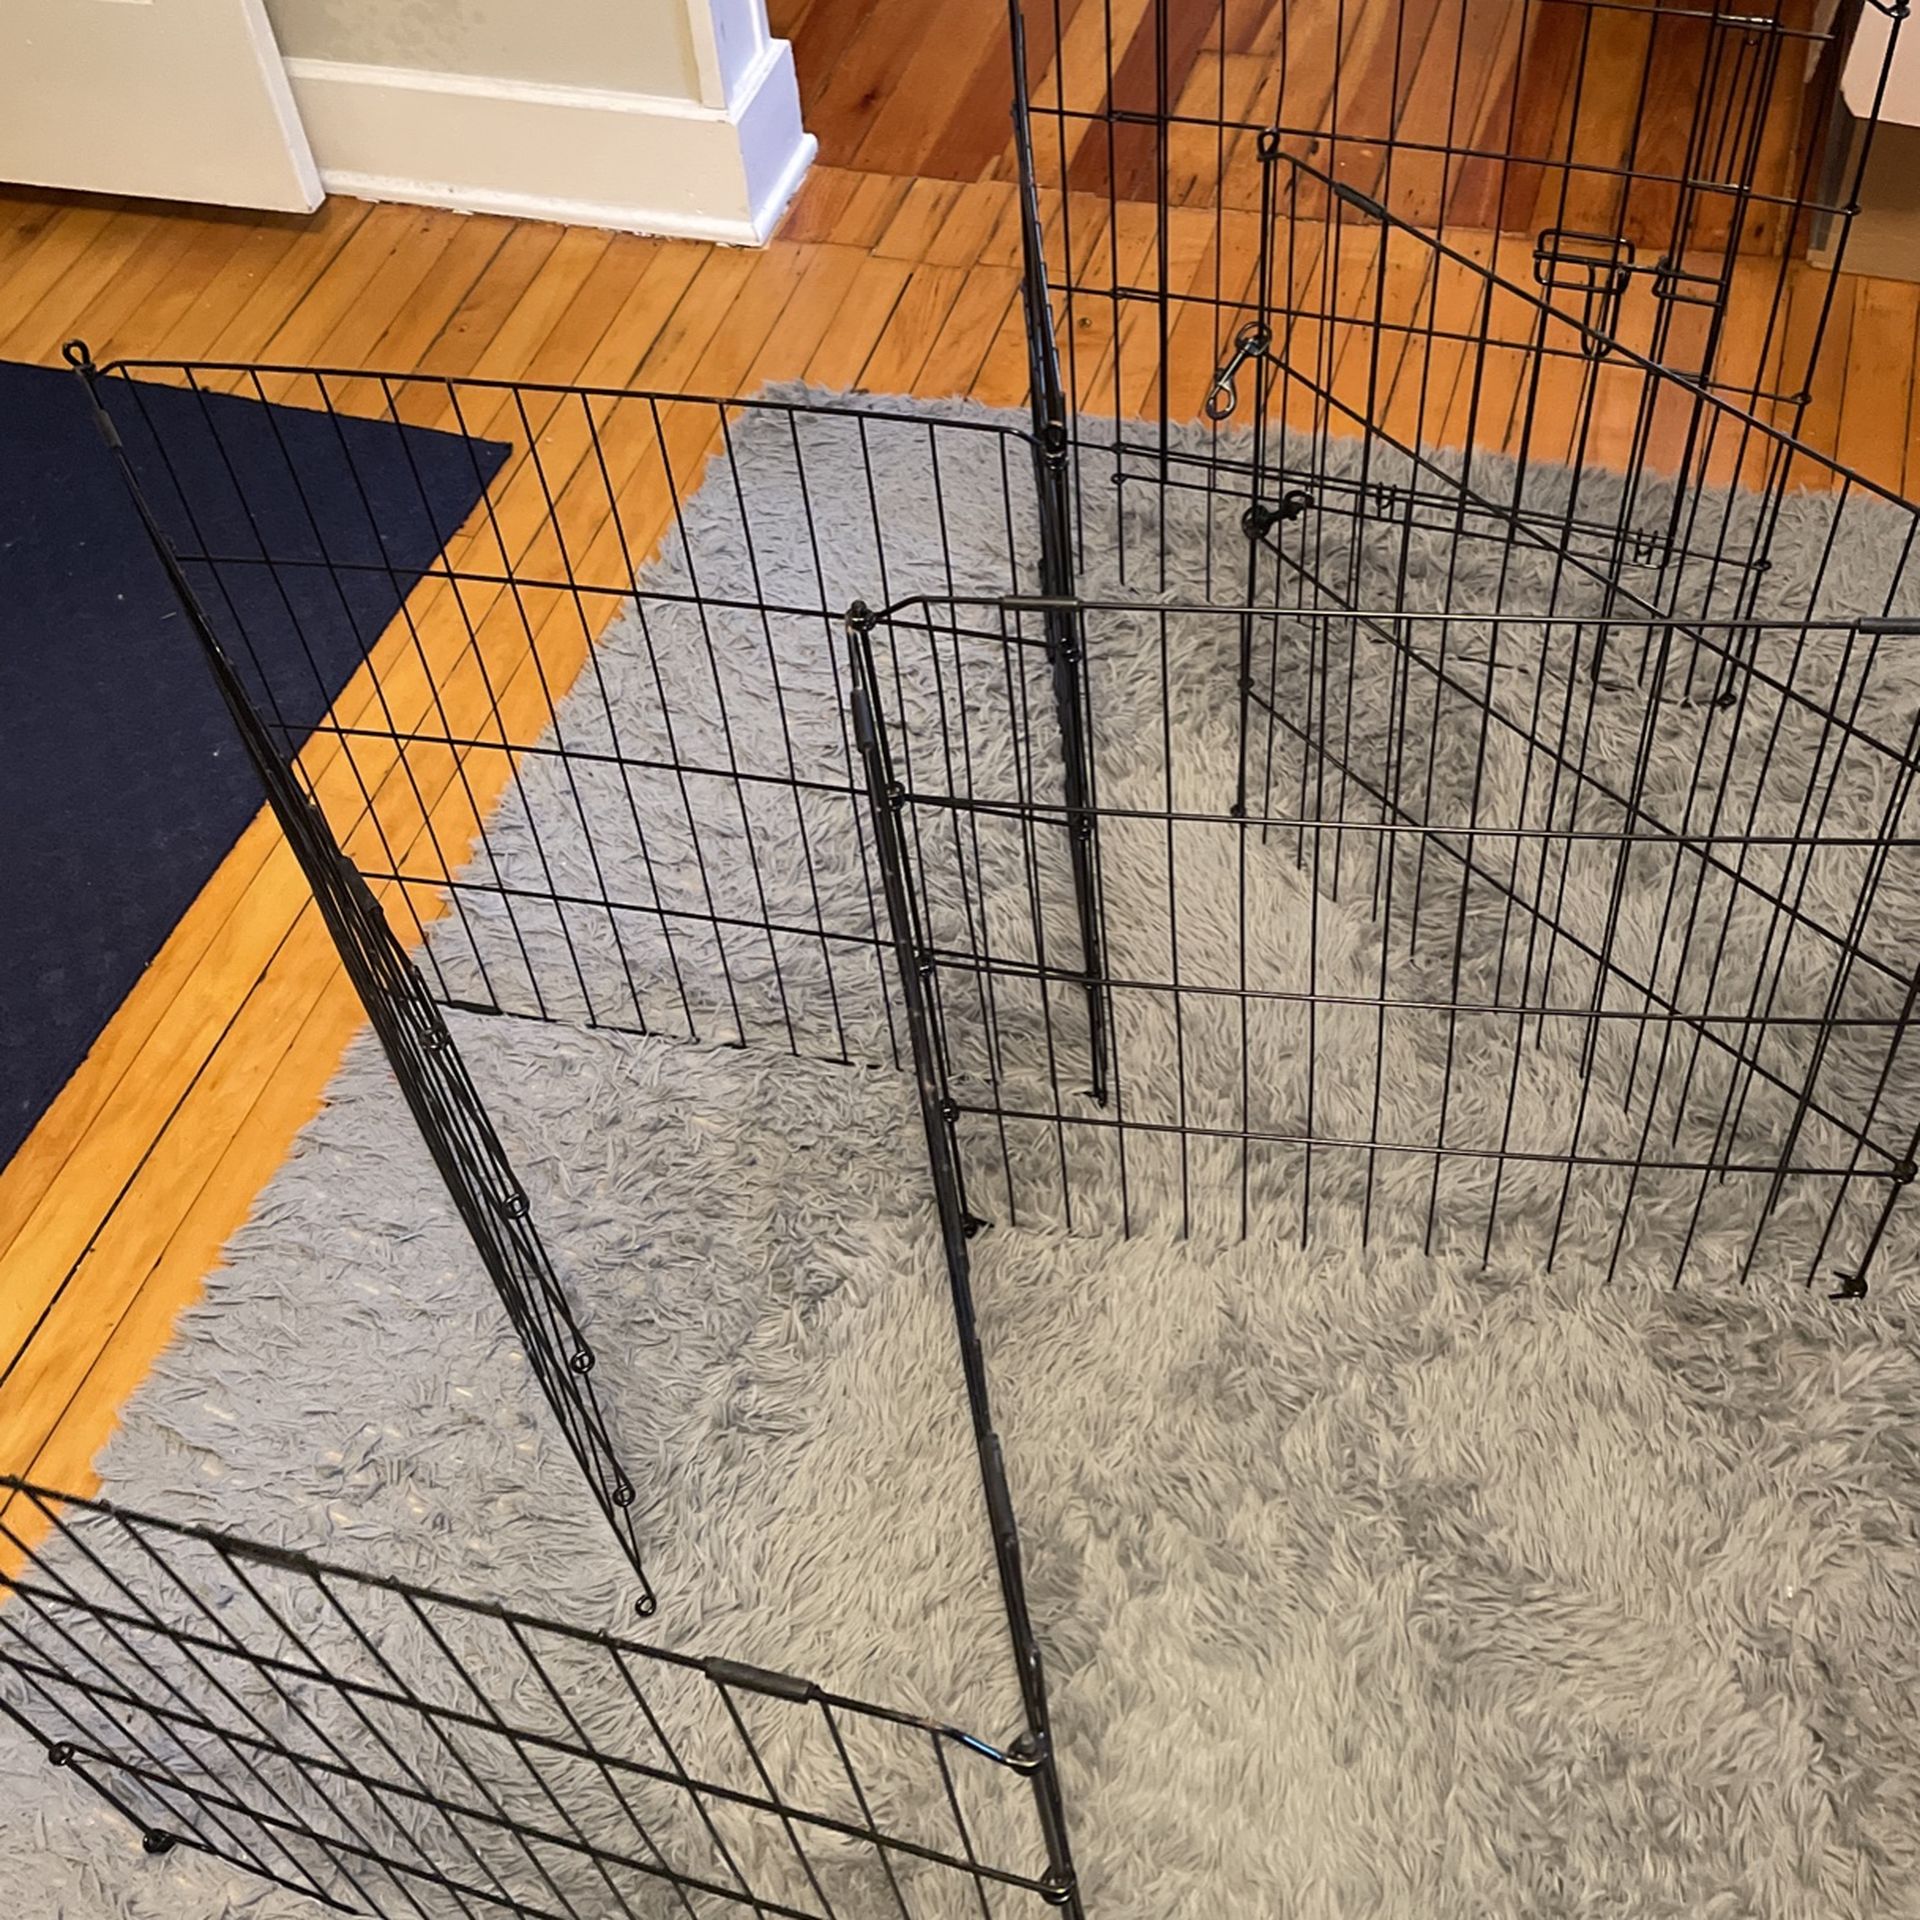 Puppy Play Area